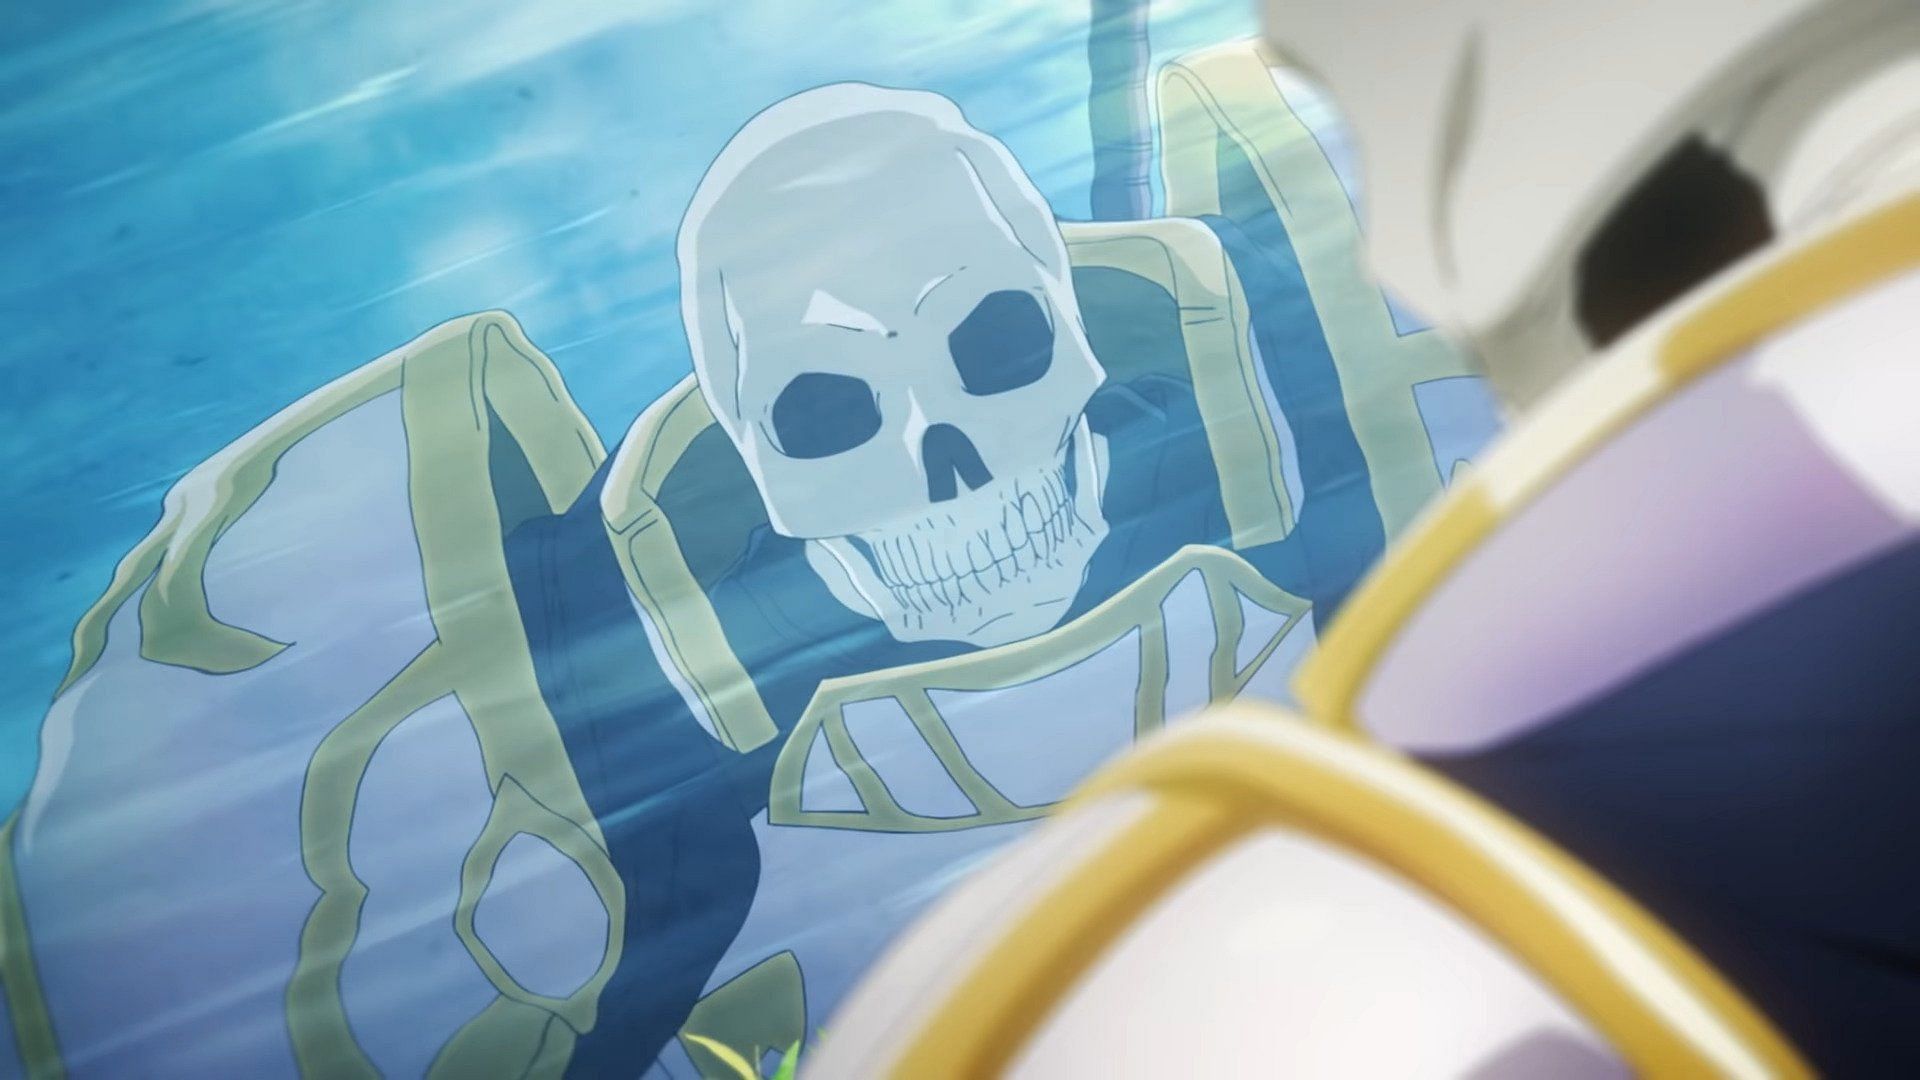 Anime Like Skeleton Knight in Another World